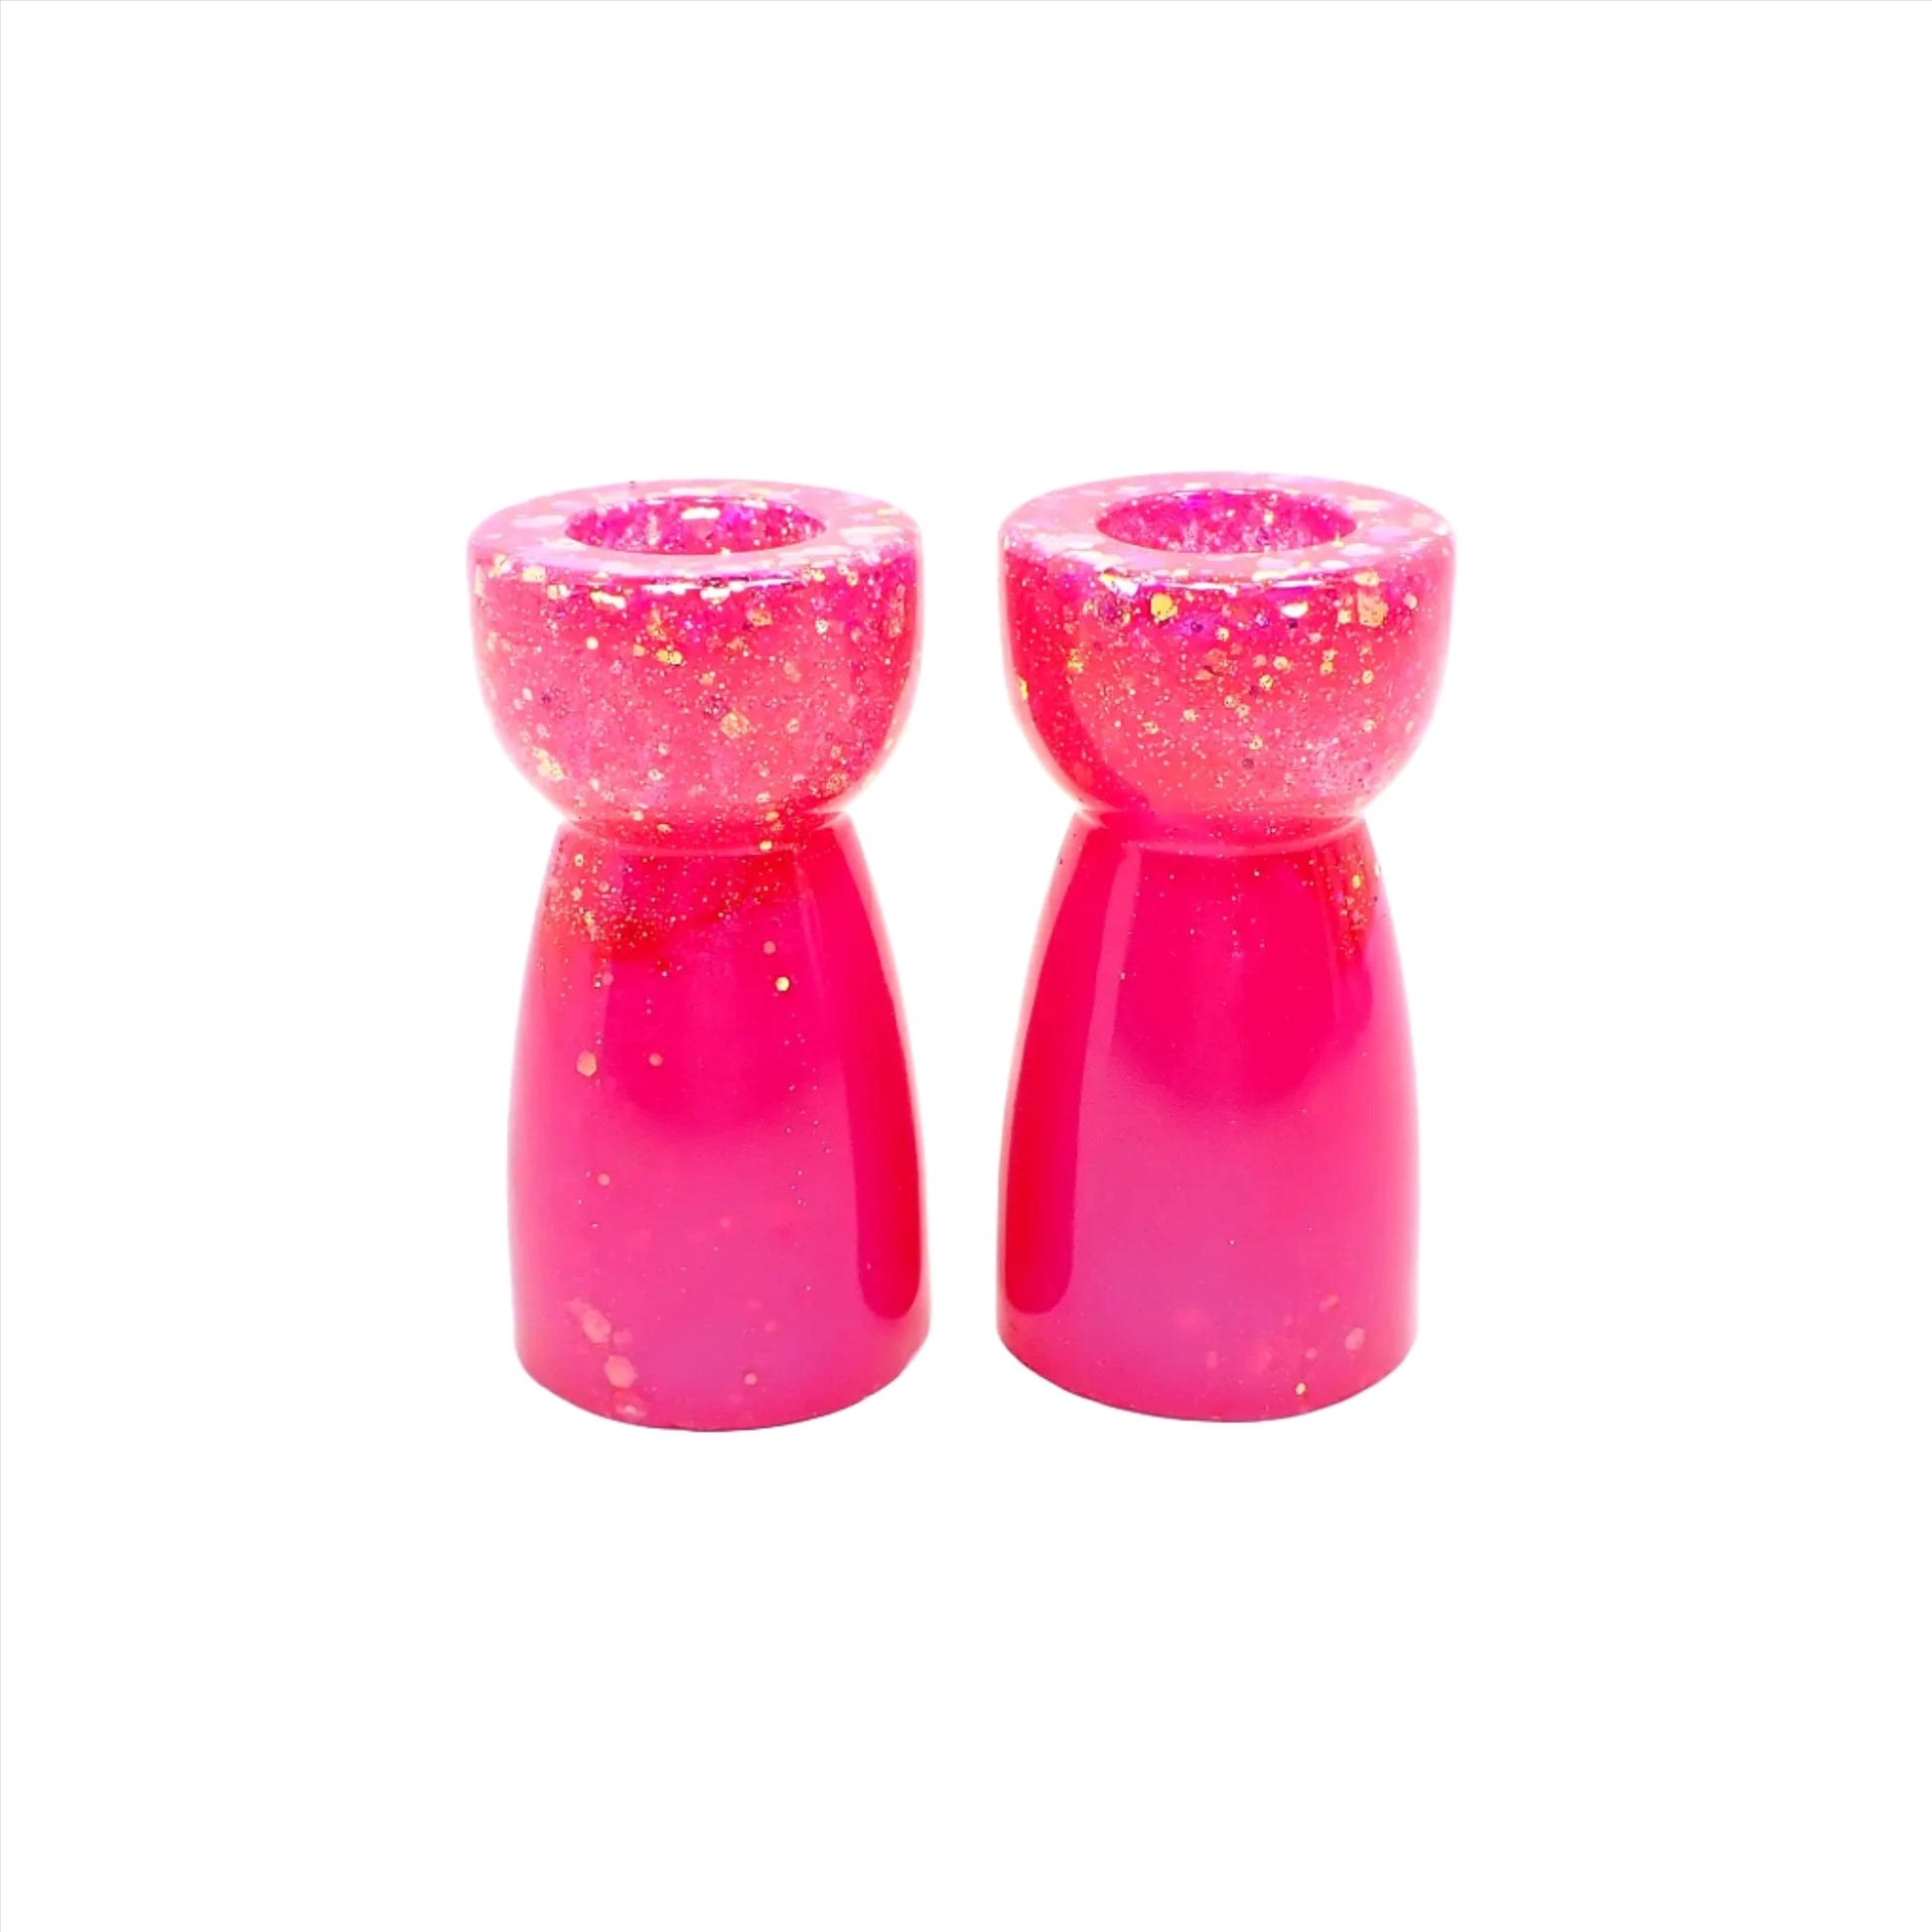 Side view of the handmade resin candlestick holders. They have bright pearly pink resin and chunky iridescent glitter. The glitter shows mostly at the top portion of the pieces. They are rounded on top and a cone like shape underneath that flares out to the bottom.